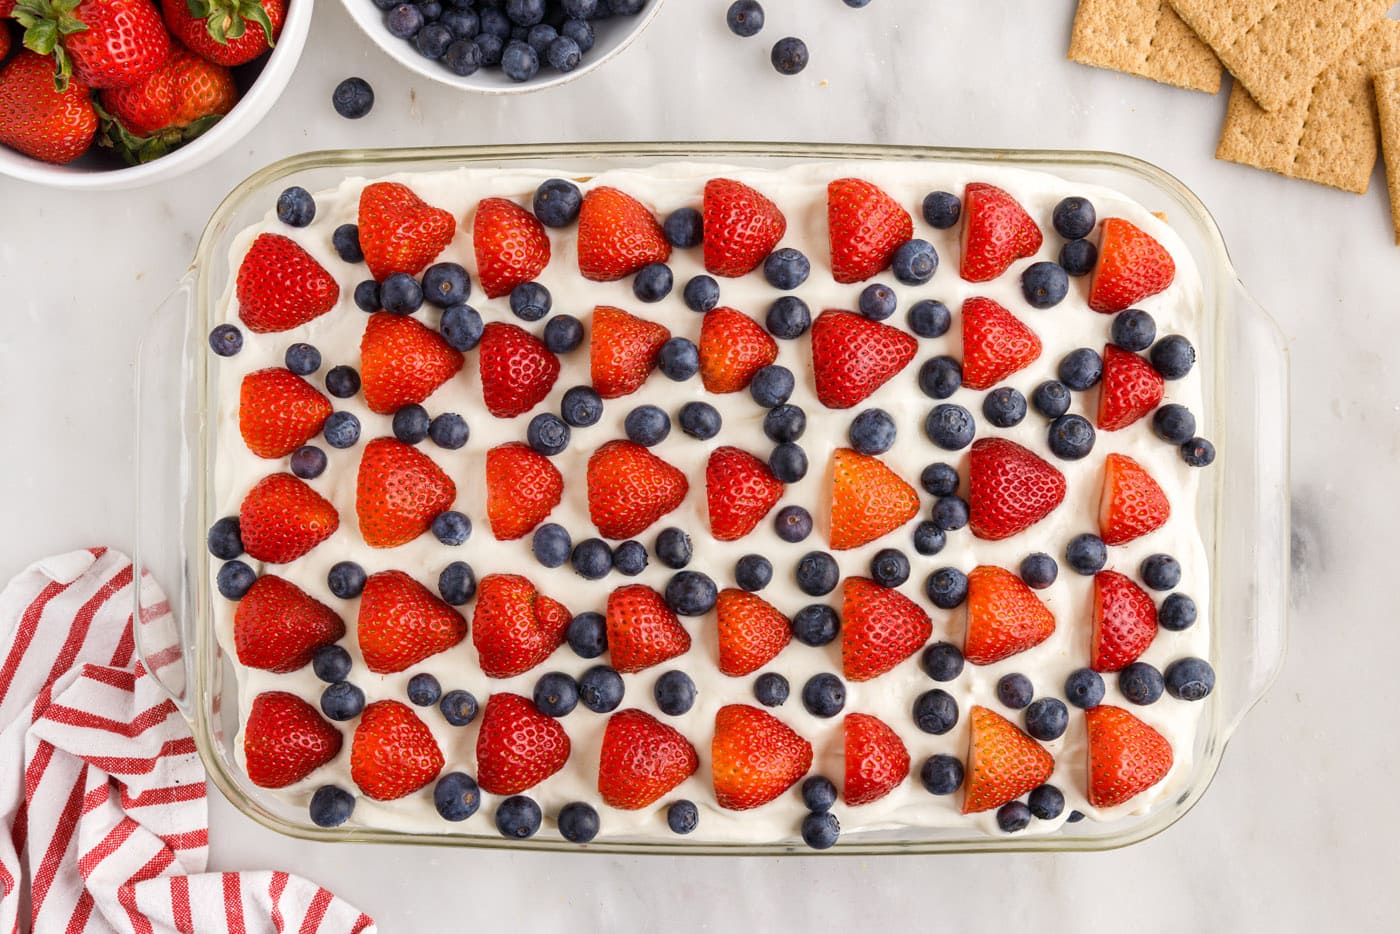 strawberries and blueberries on top of mixed berry icebox cake